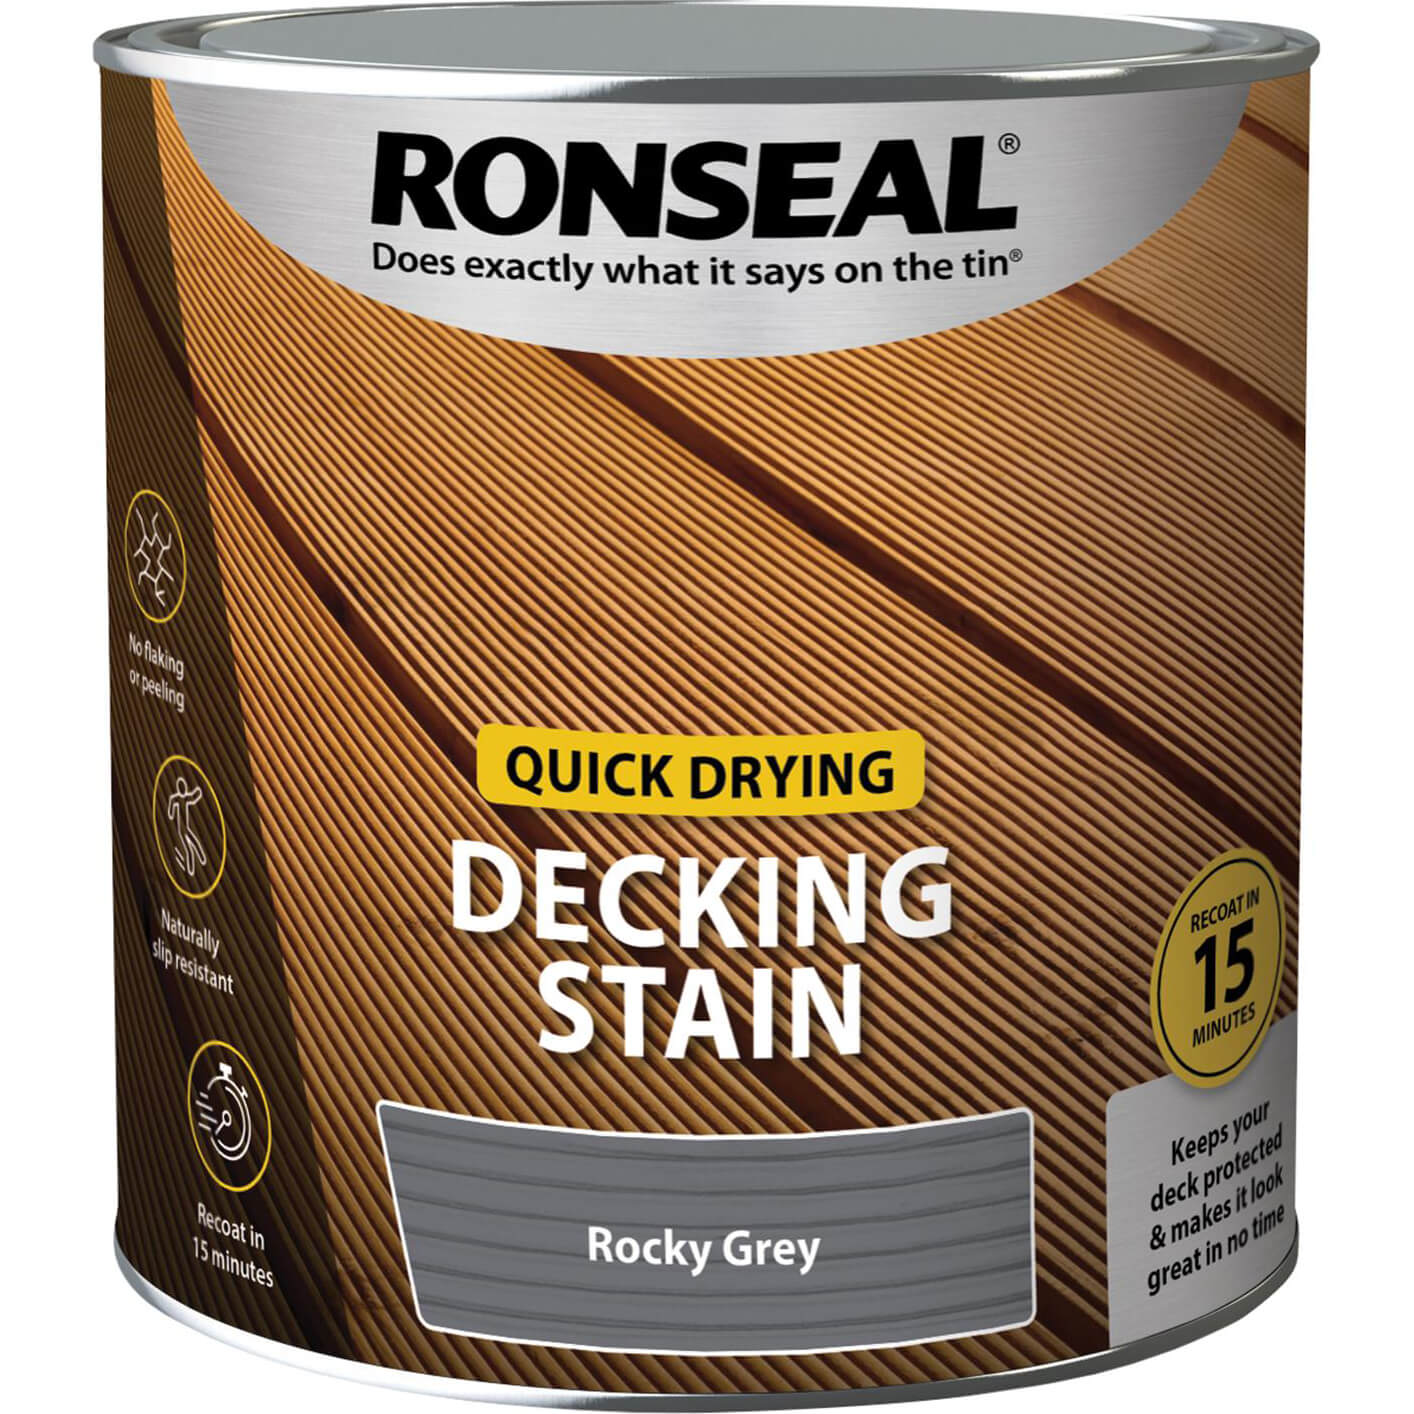 Ronseal Quick Drying Decking Stain 2.5l Rocky Grey